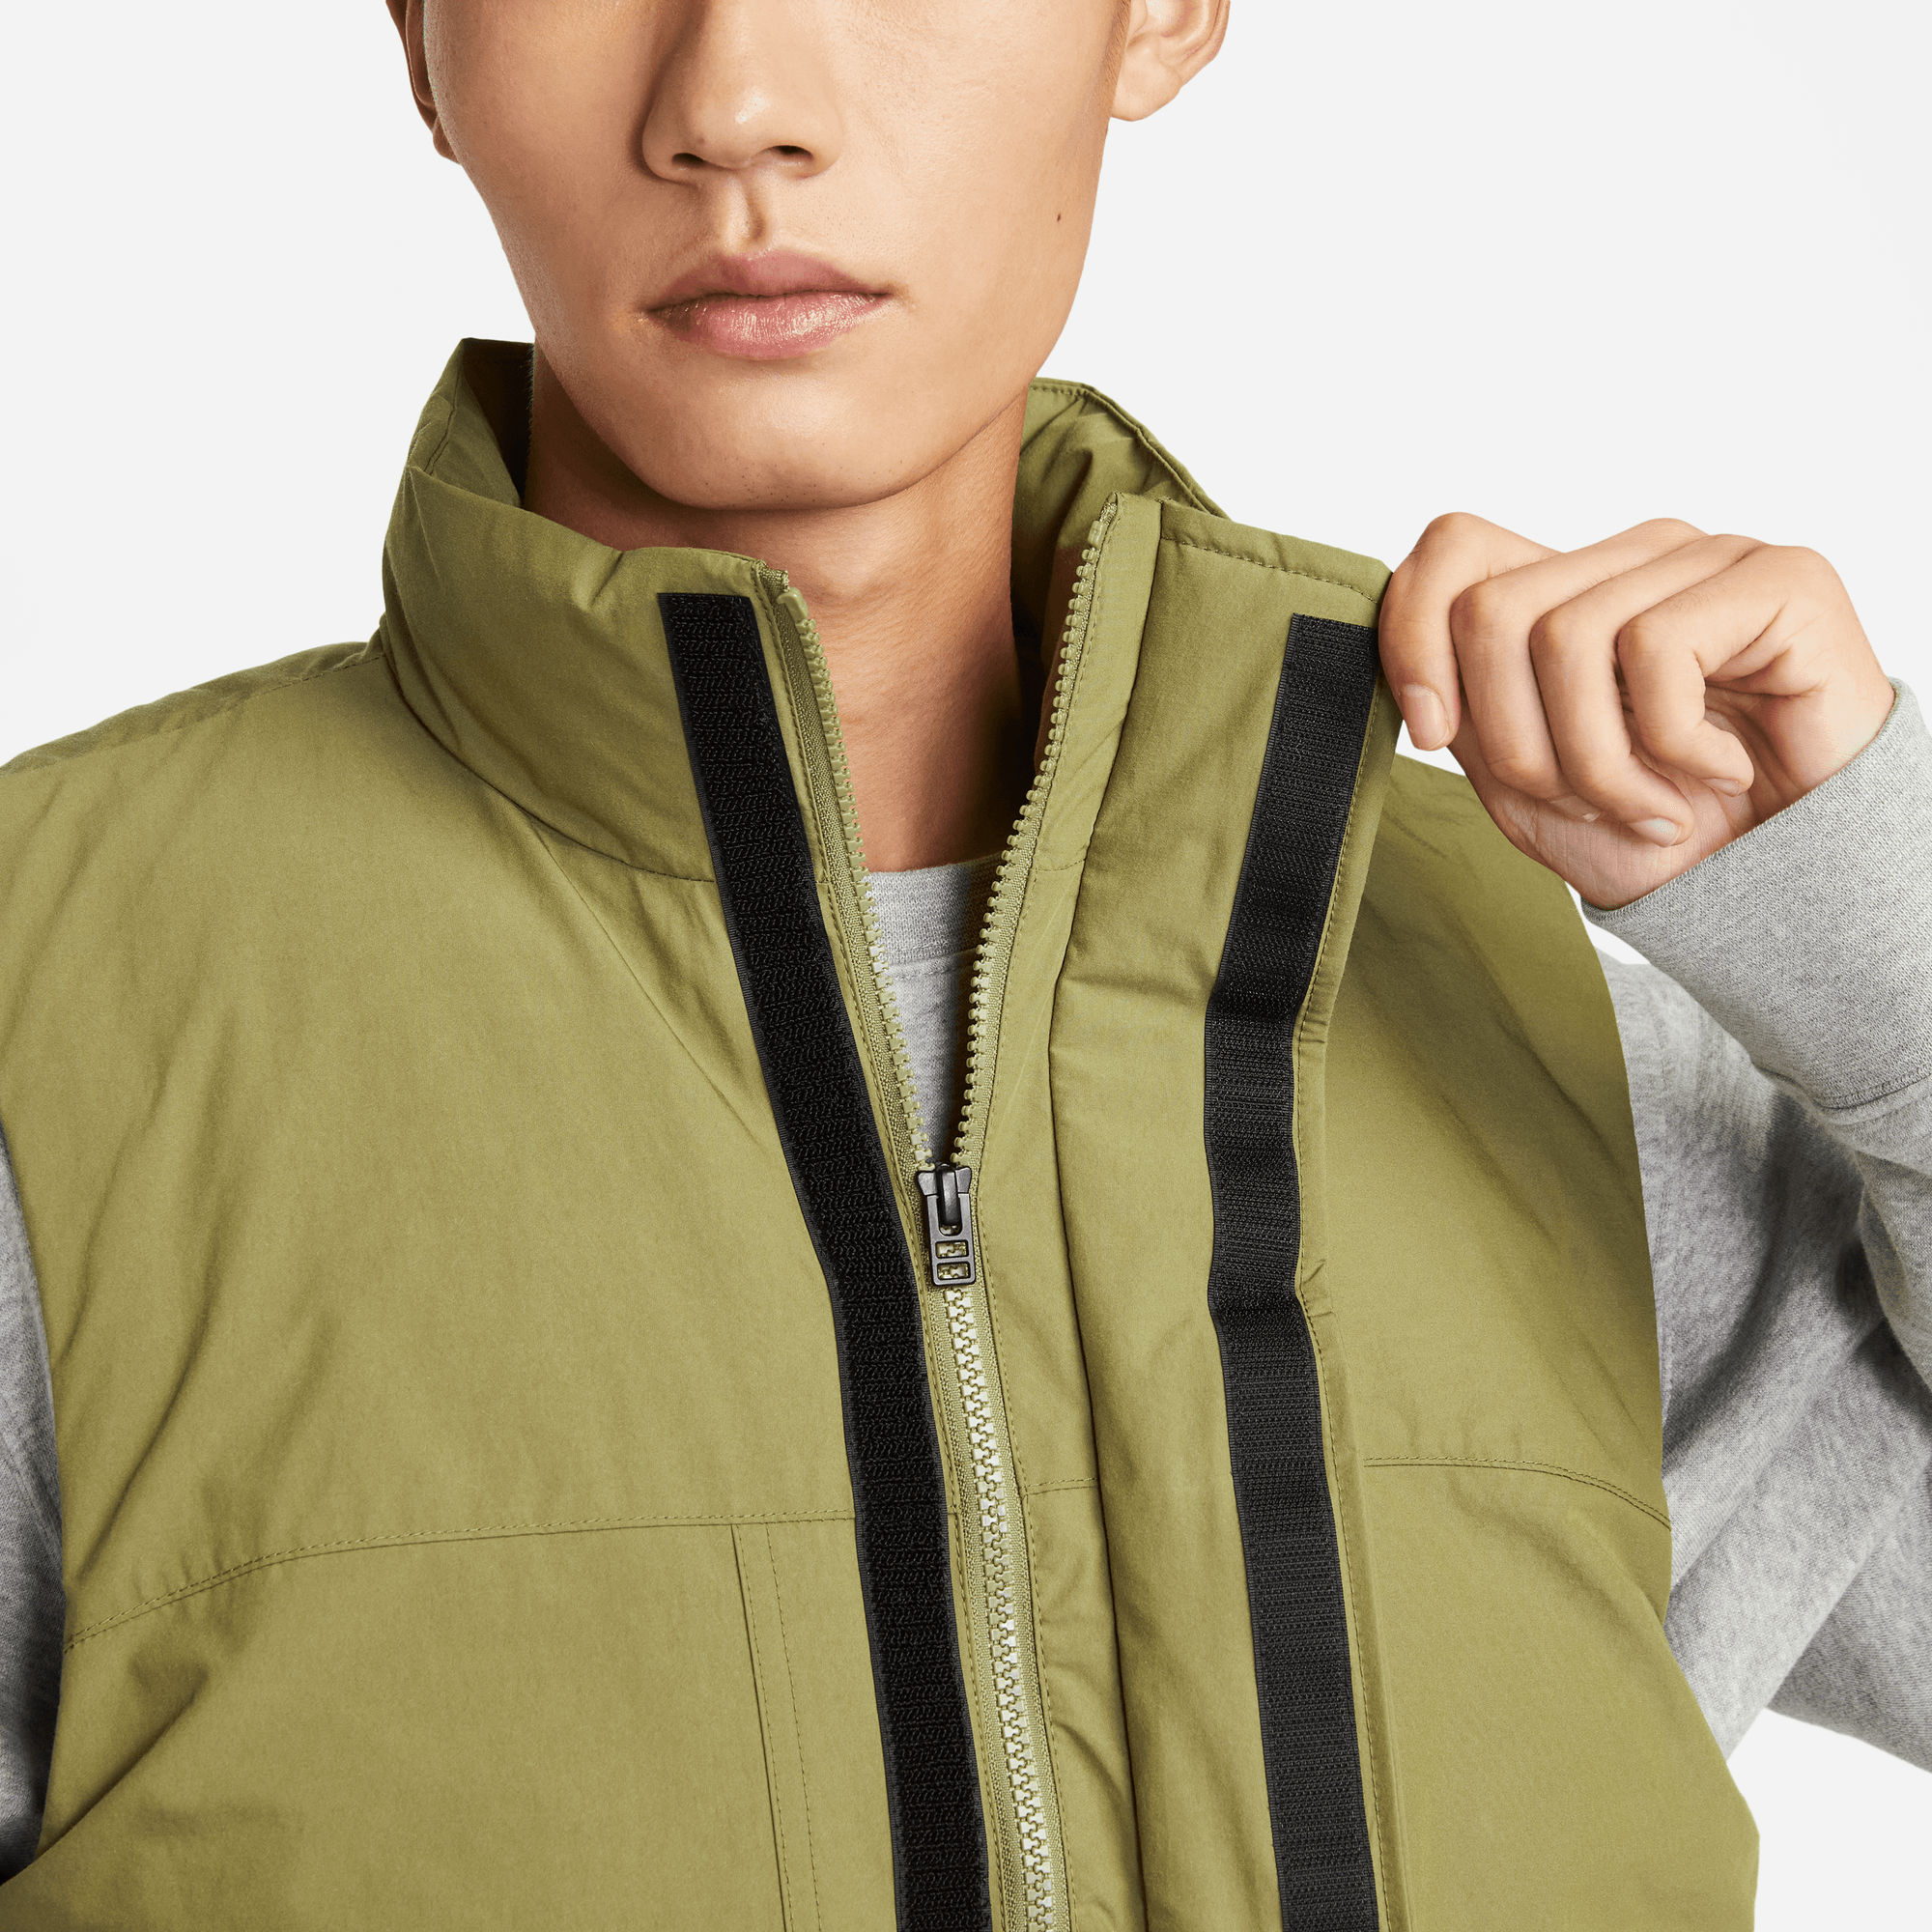 Nike Sportswear Therma-FIT Tech Pack Green Insulated Vest